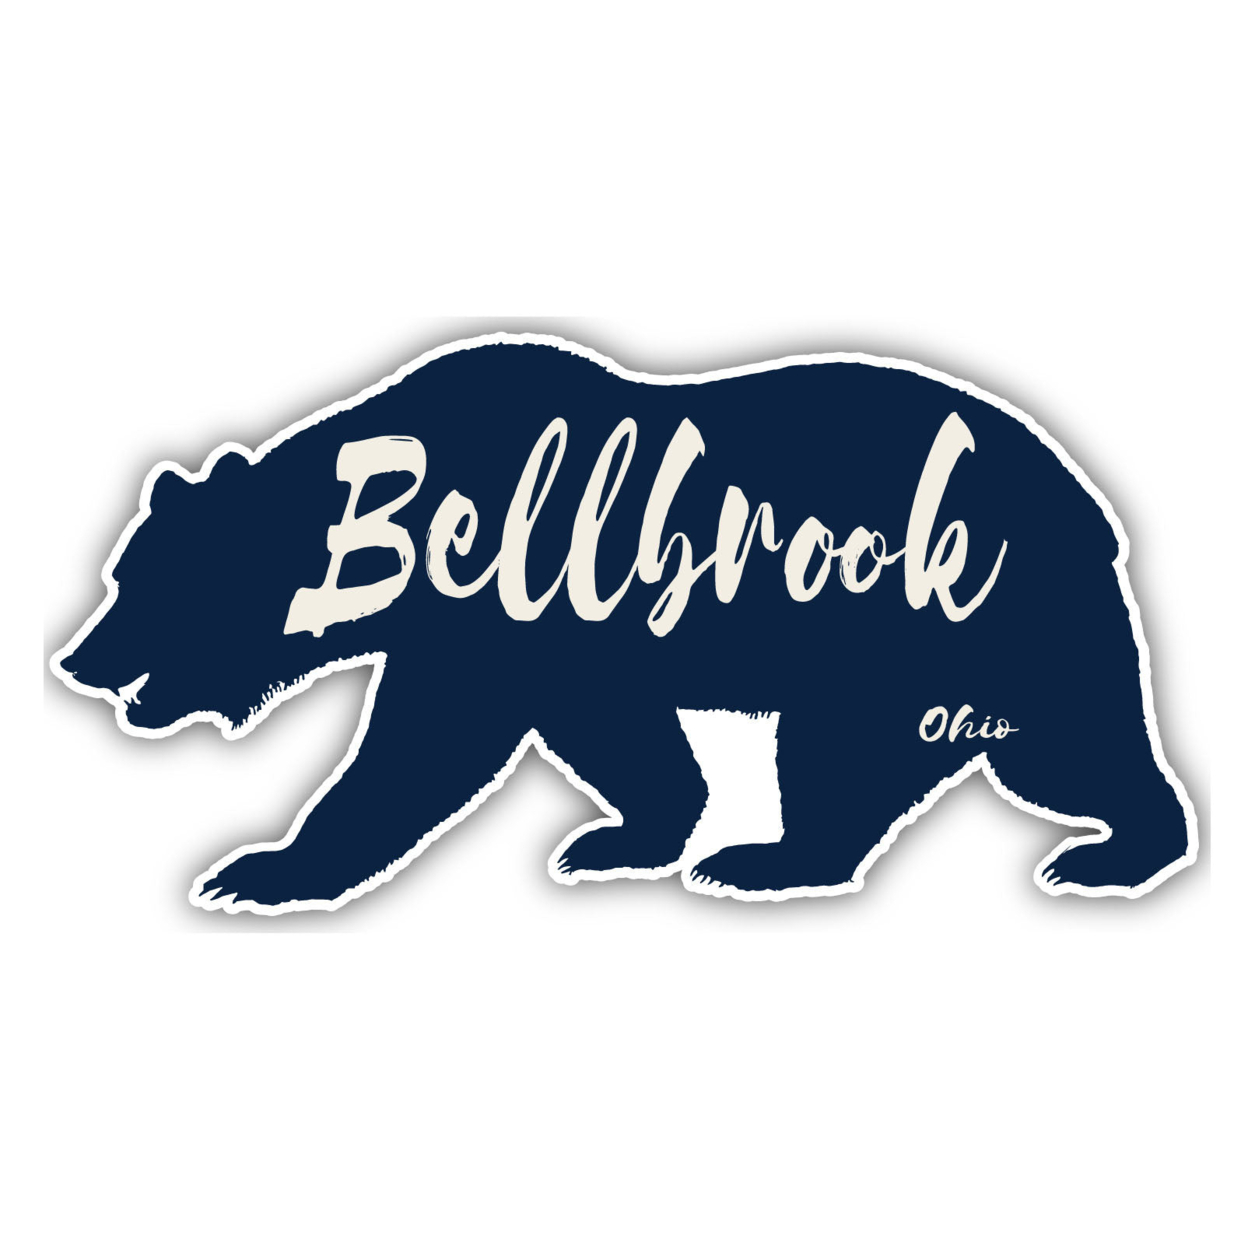 Bellbrook Ohio Souvenir Decorative Stickers (Choose Theme And Size) - 4-Pack, 10-Inch, Bear